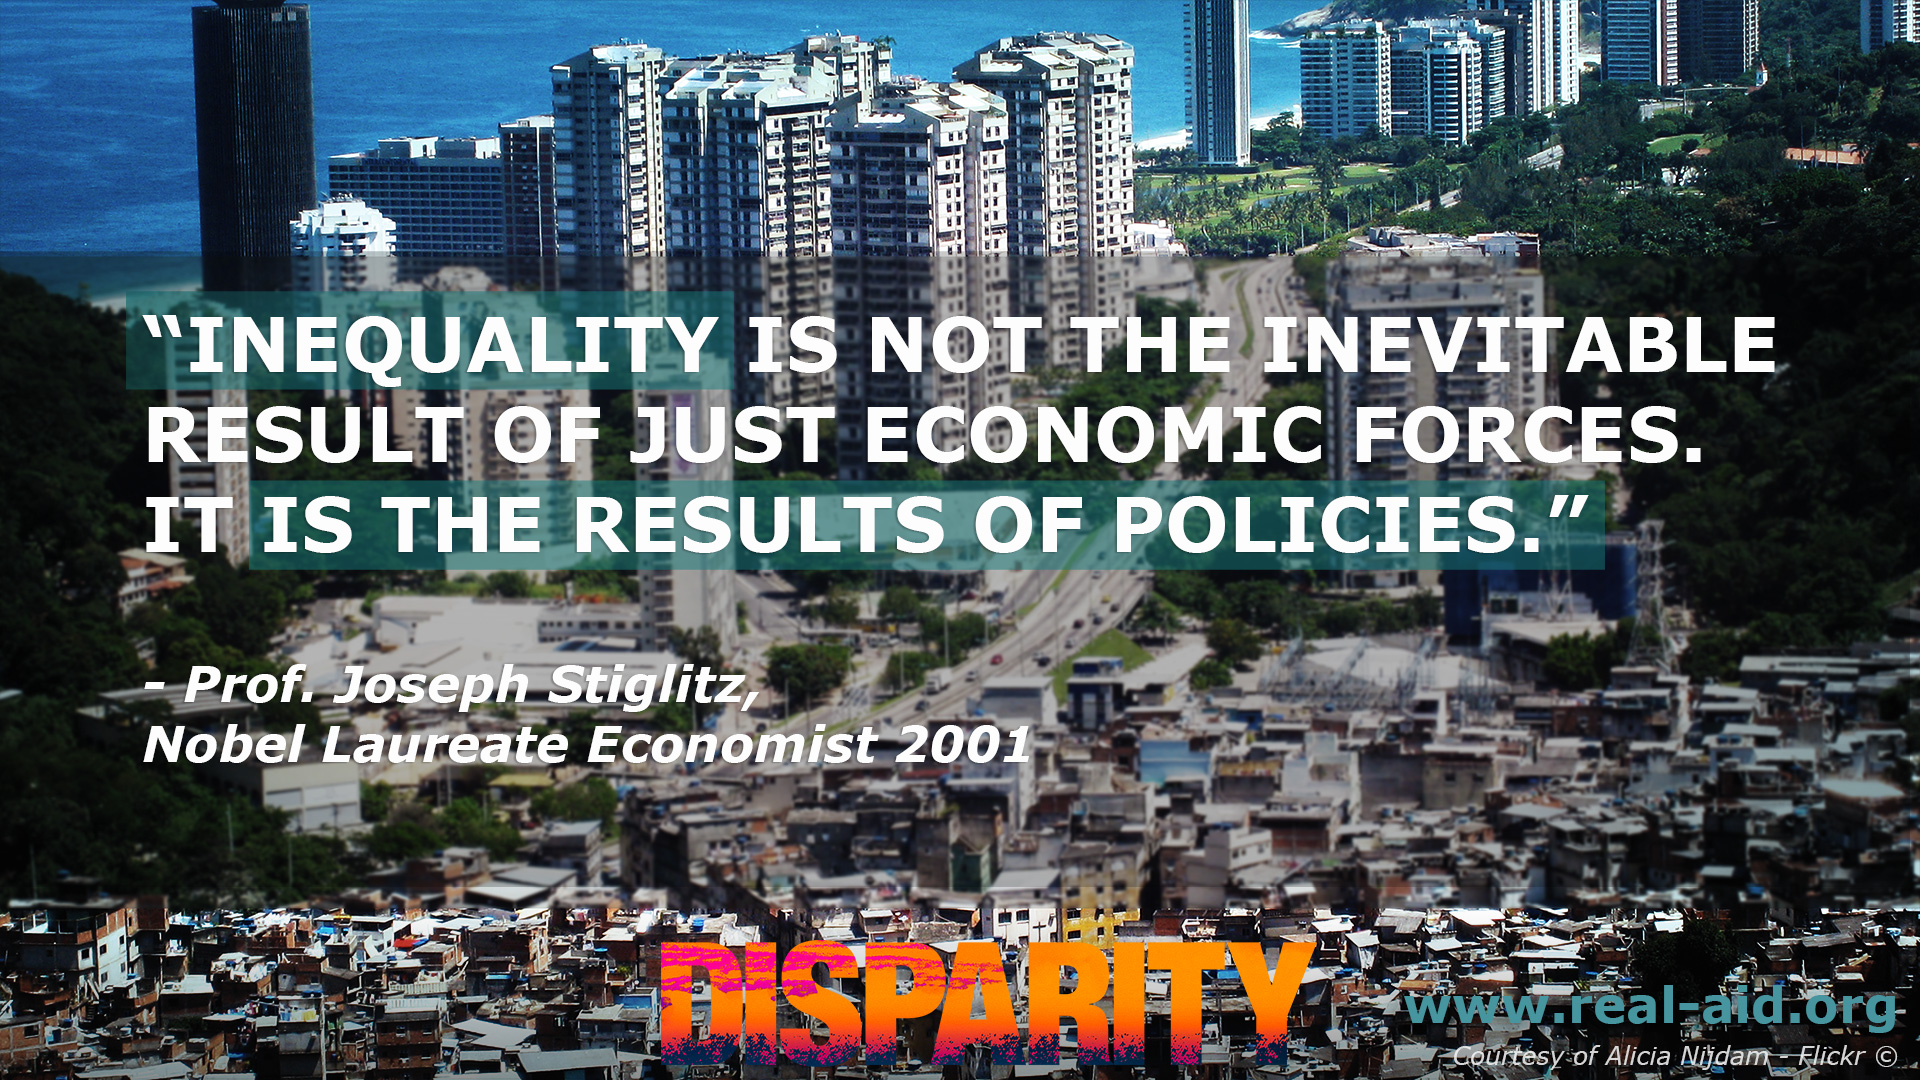 Inequality is not the ineviatble result of just economic forces text, background image of slum and highrise building on coast